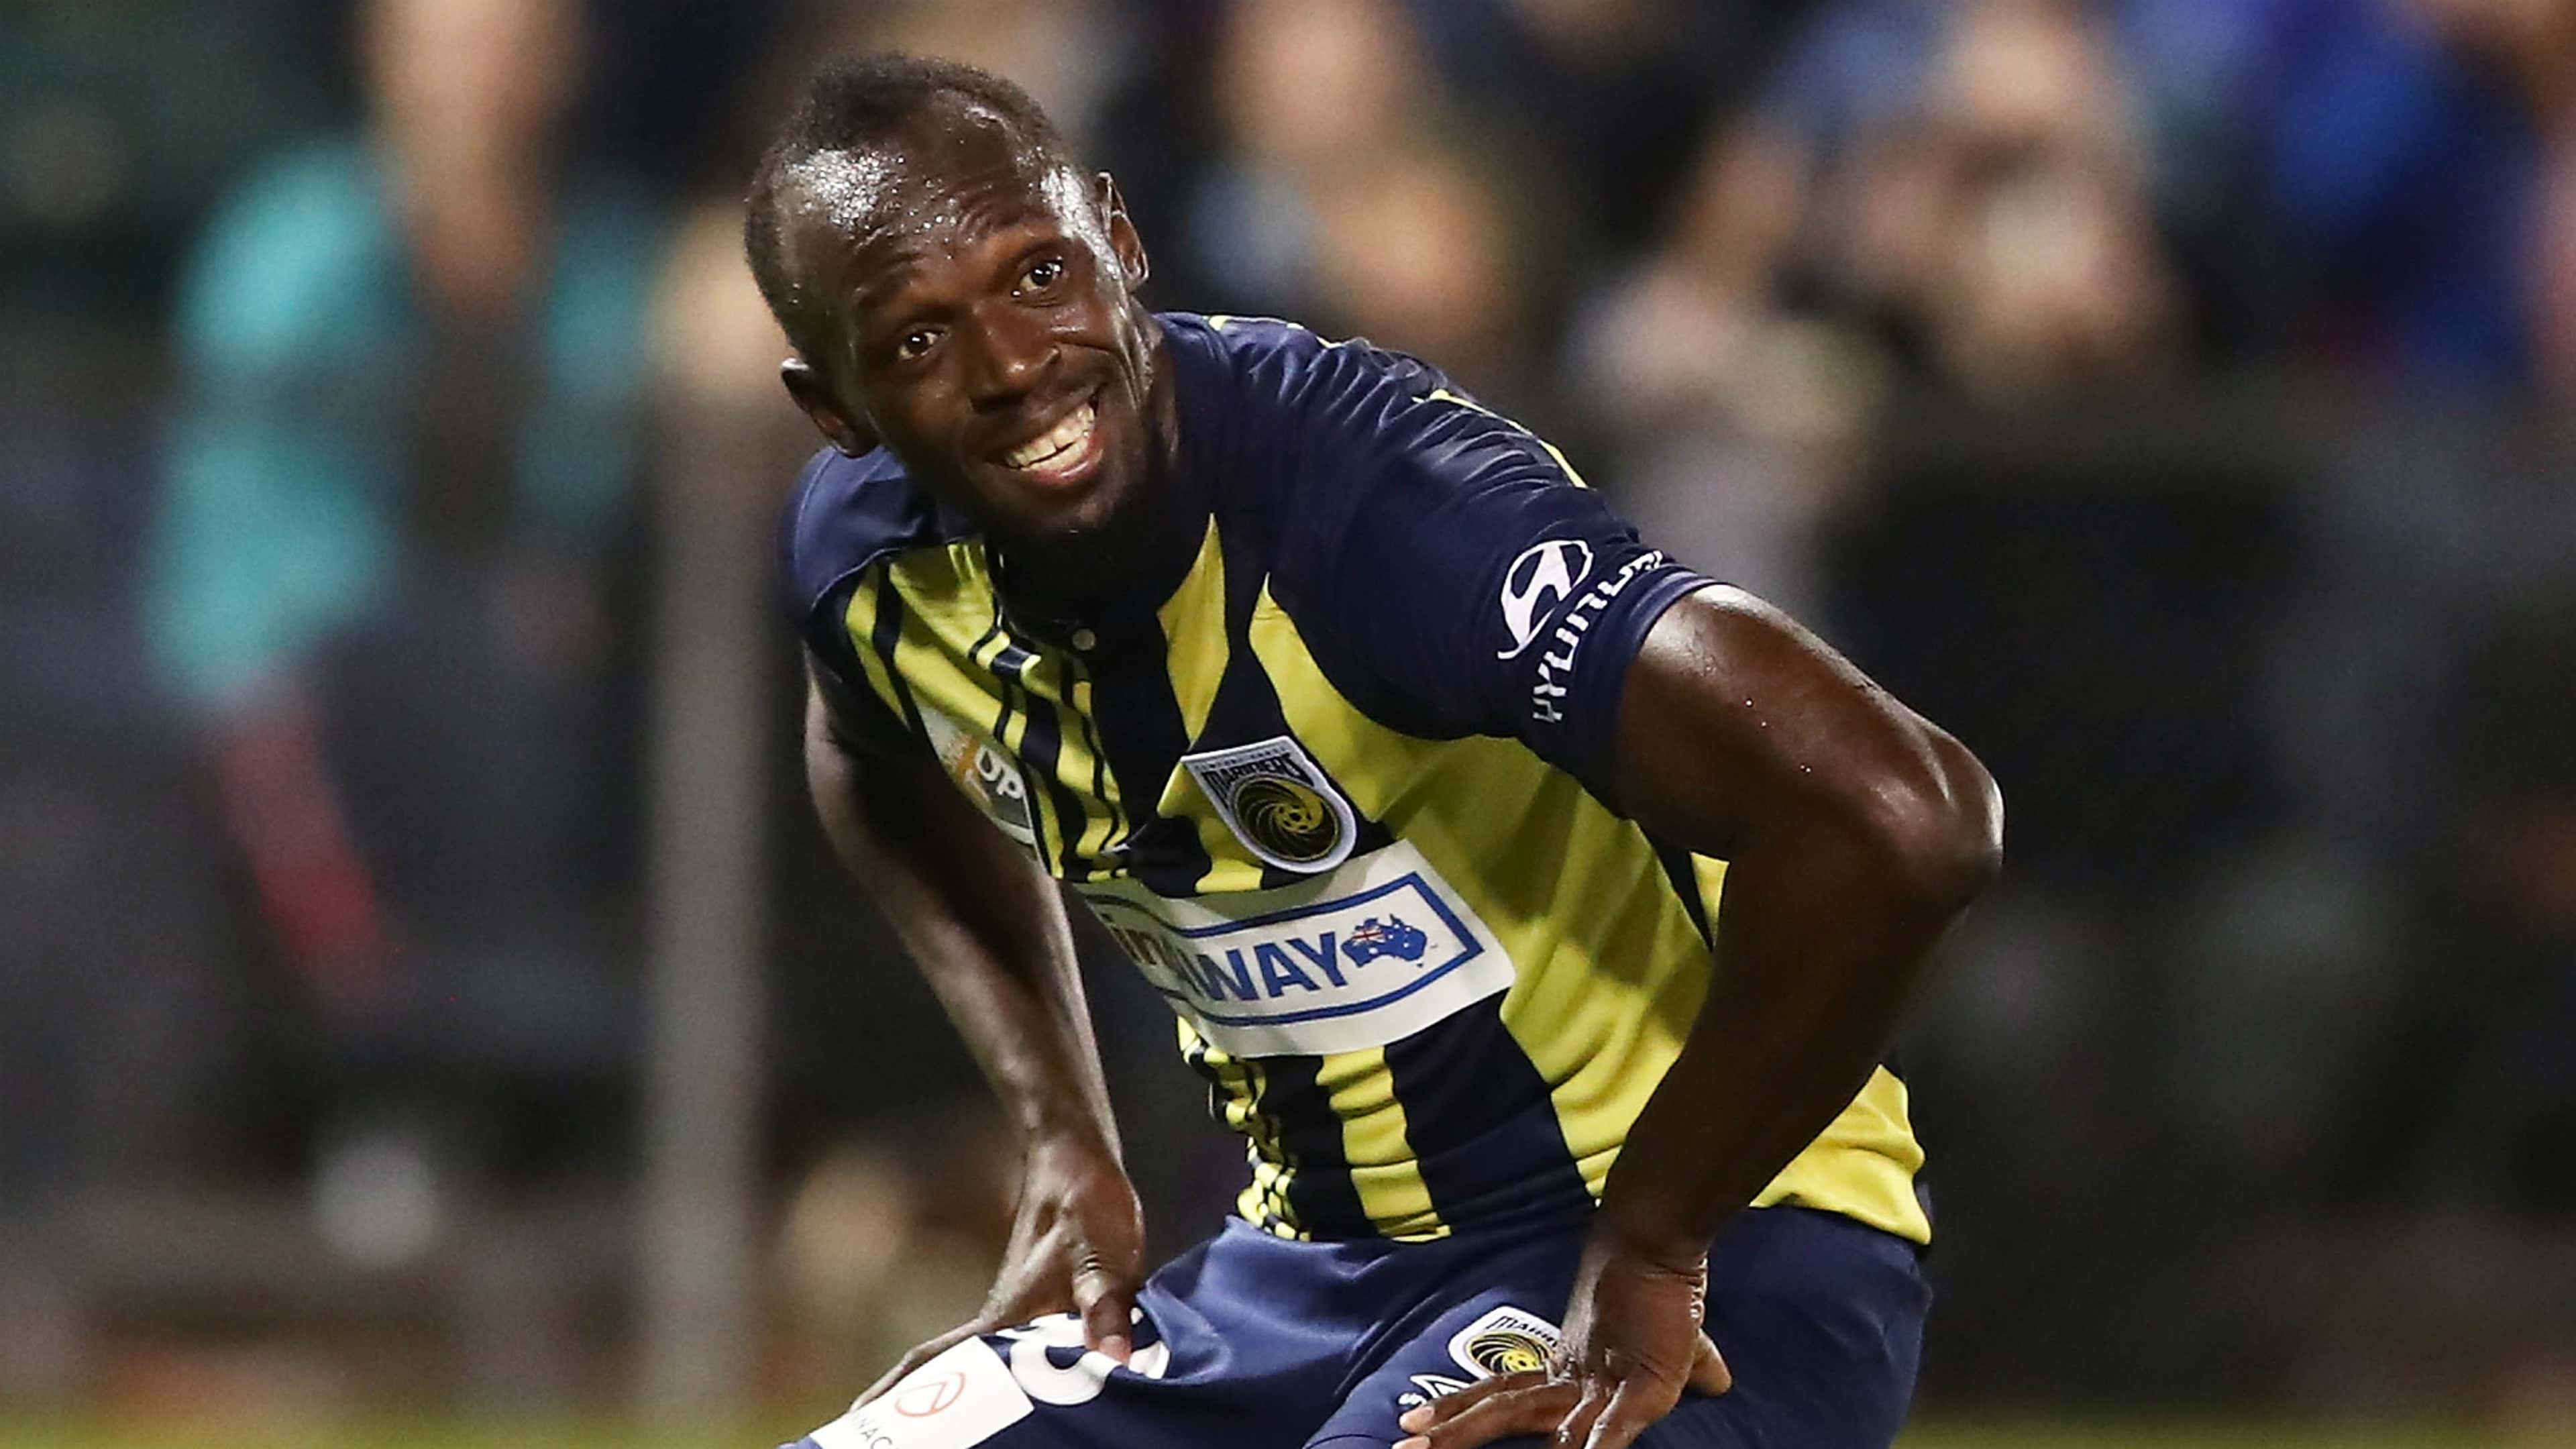 Usain Bolt's goals: One lightning strike but his A-League football future  with Central Coast Mariners is still cloudy 